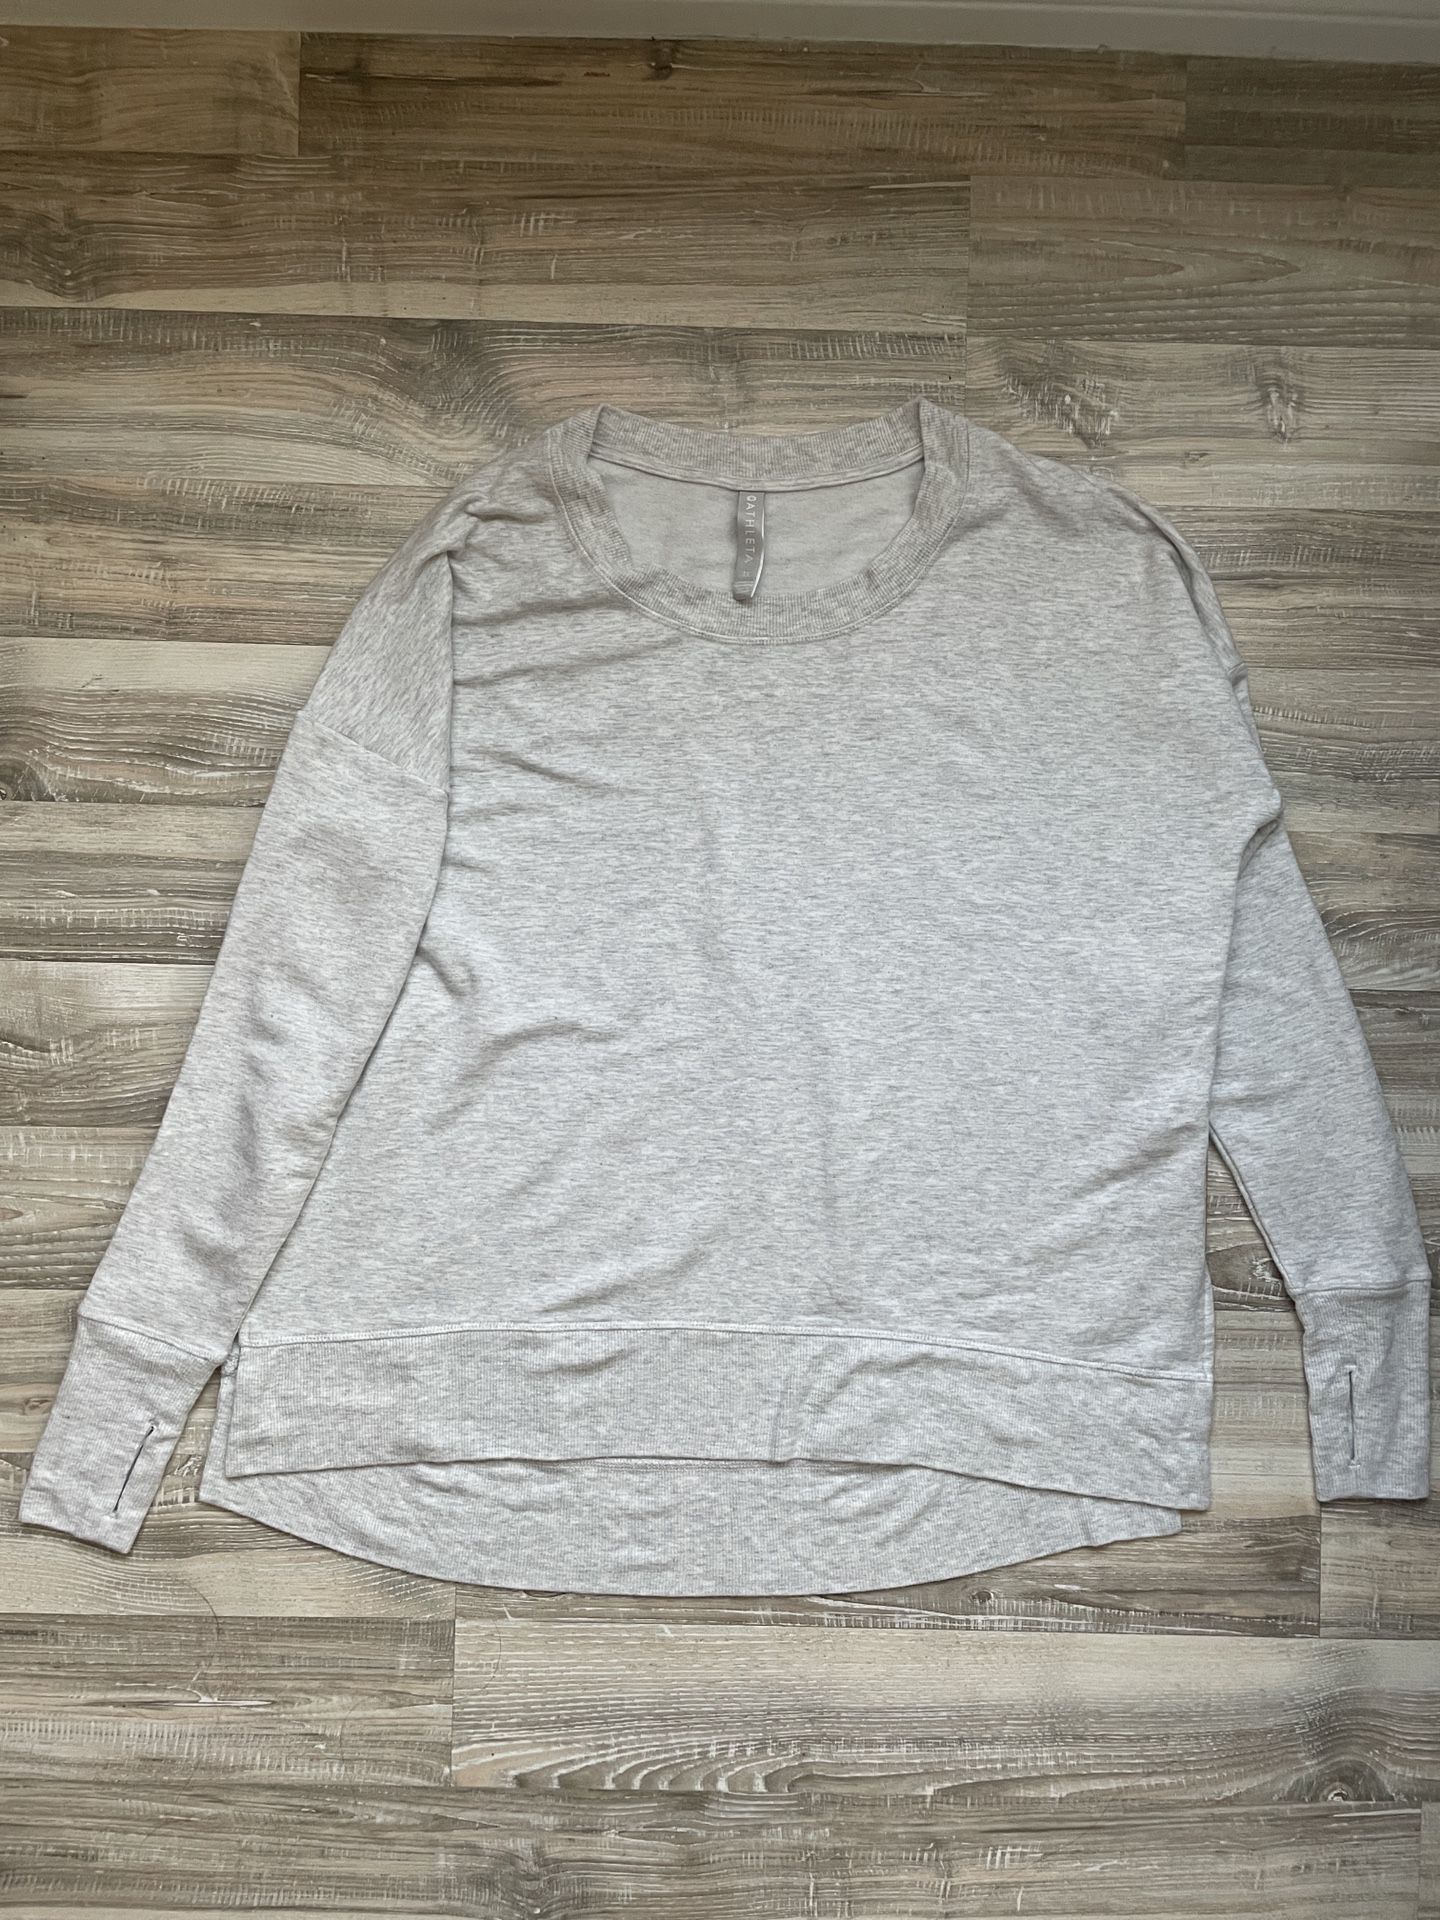 Athleta Crew Neck Pullover Solid Grey Sweater Size 1X Modal Fleece Lined Casual